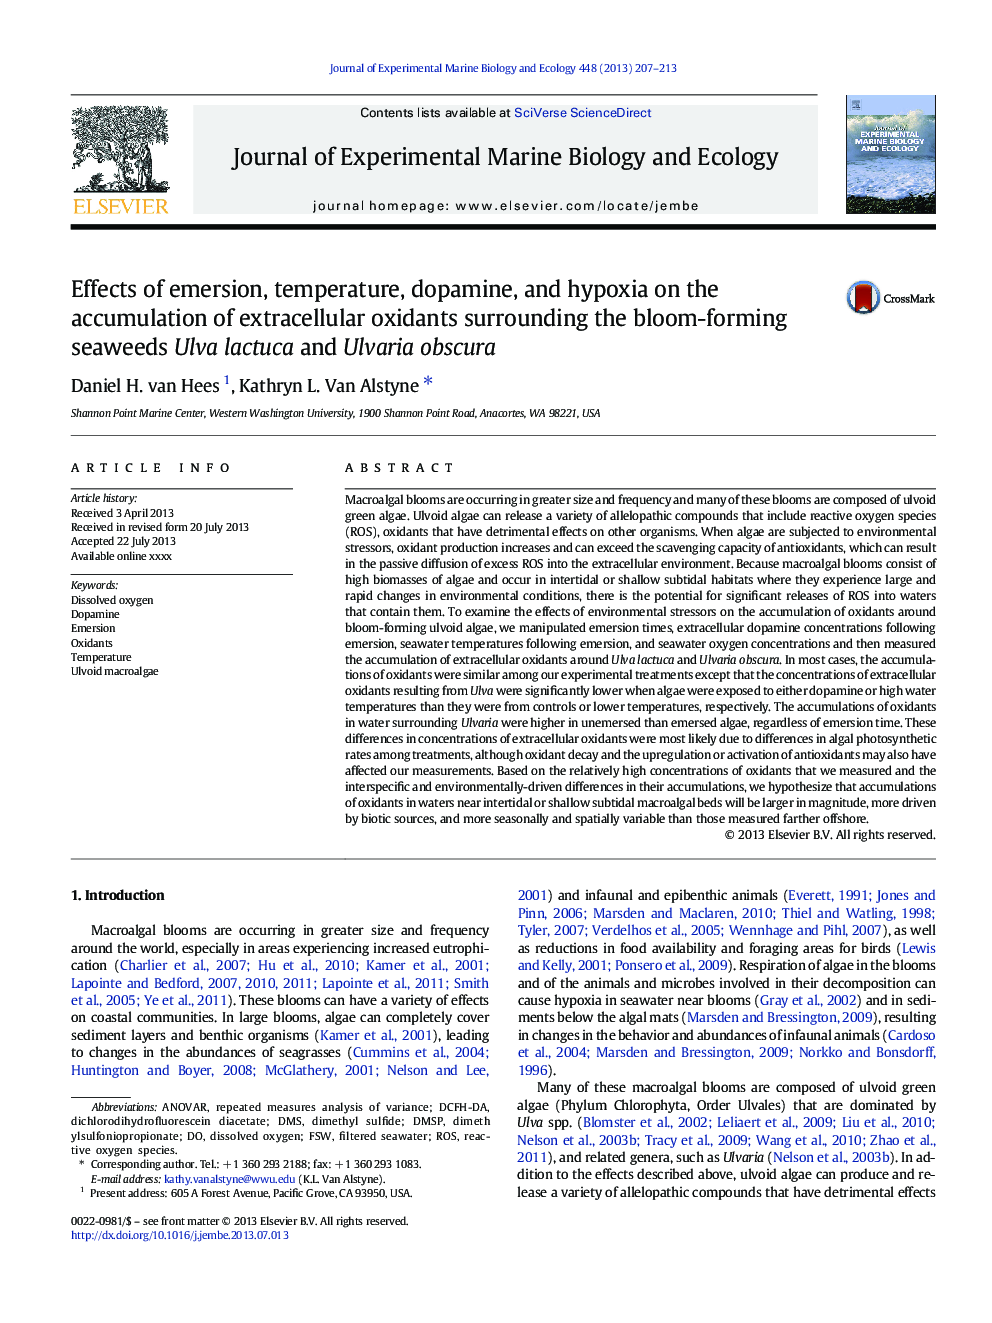 Effects of emersion, temperature, dopamine, and hypoxia on the accumulation of extracellular oxidants surrounding the bloom-forming seaweeds Ulva lactuca and Ulvaria obscura